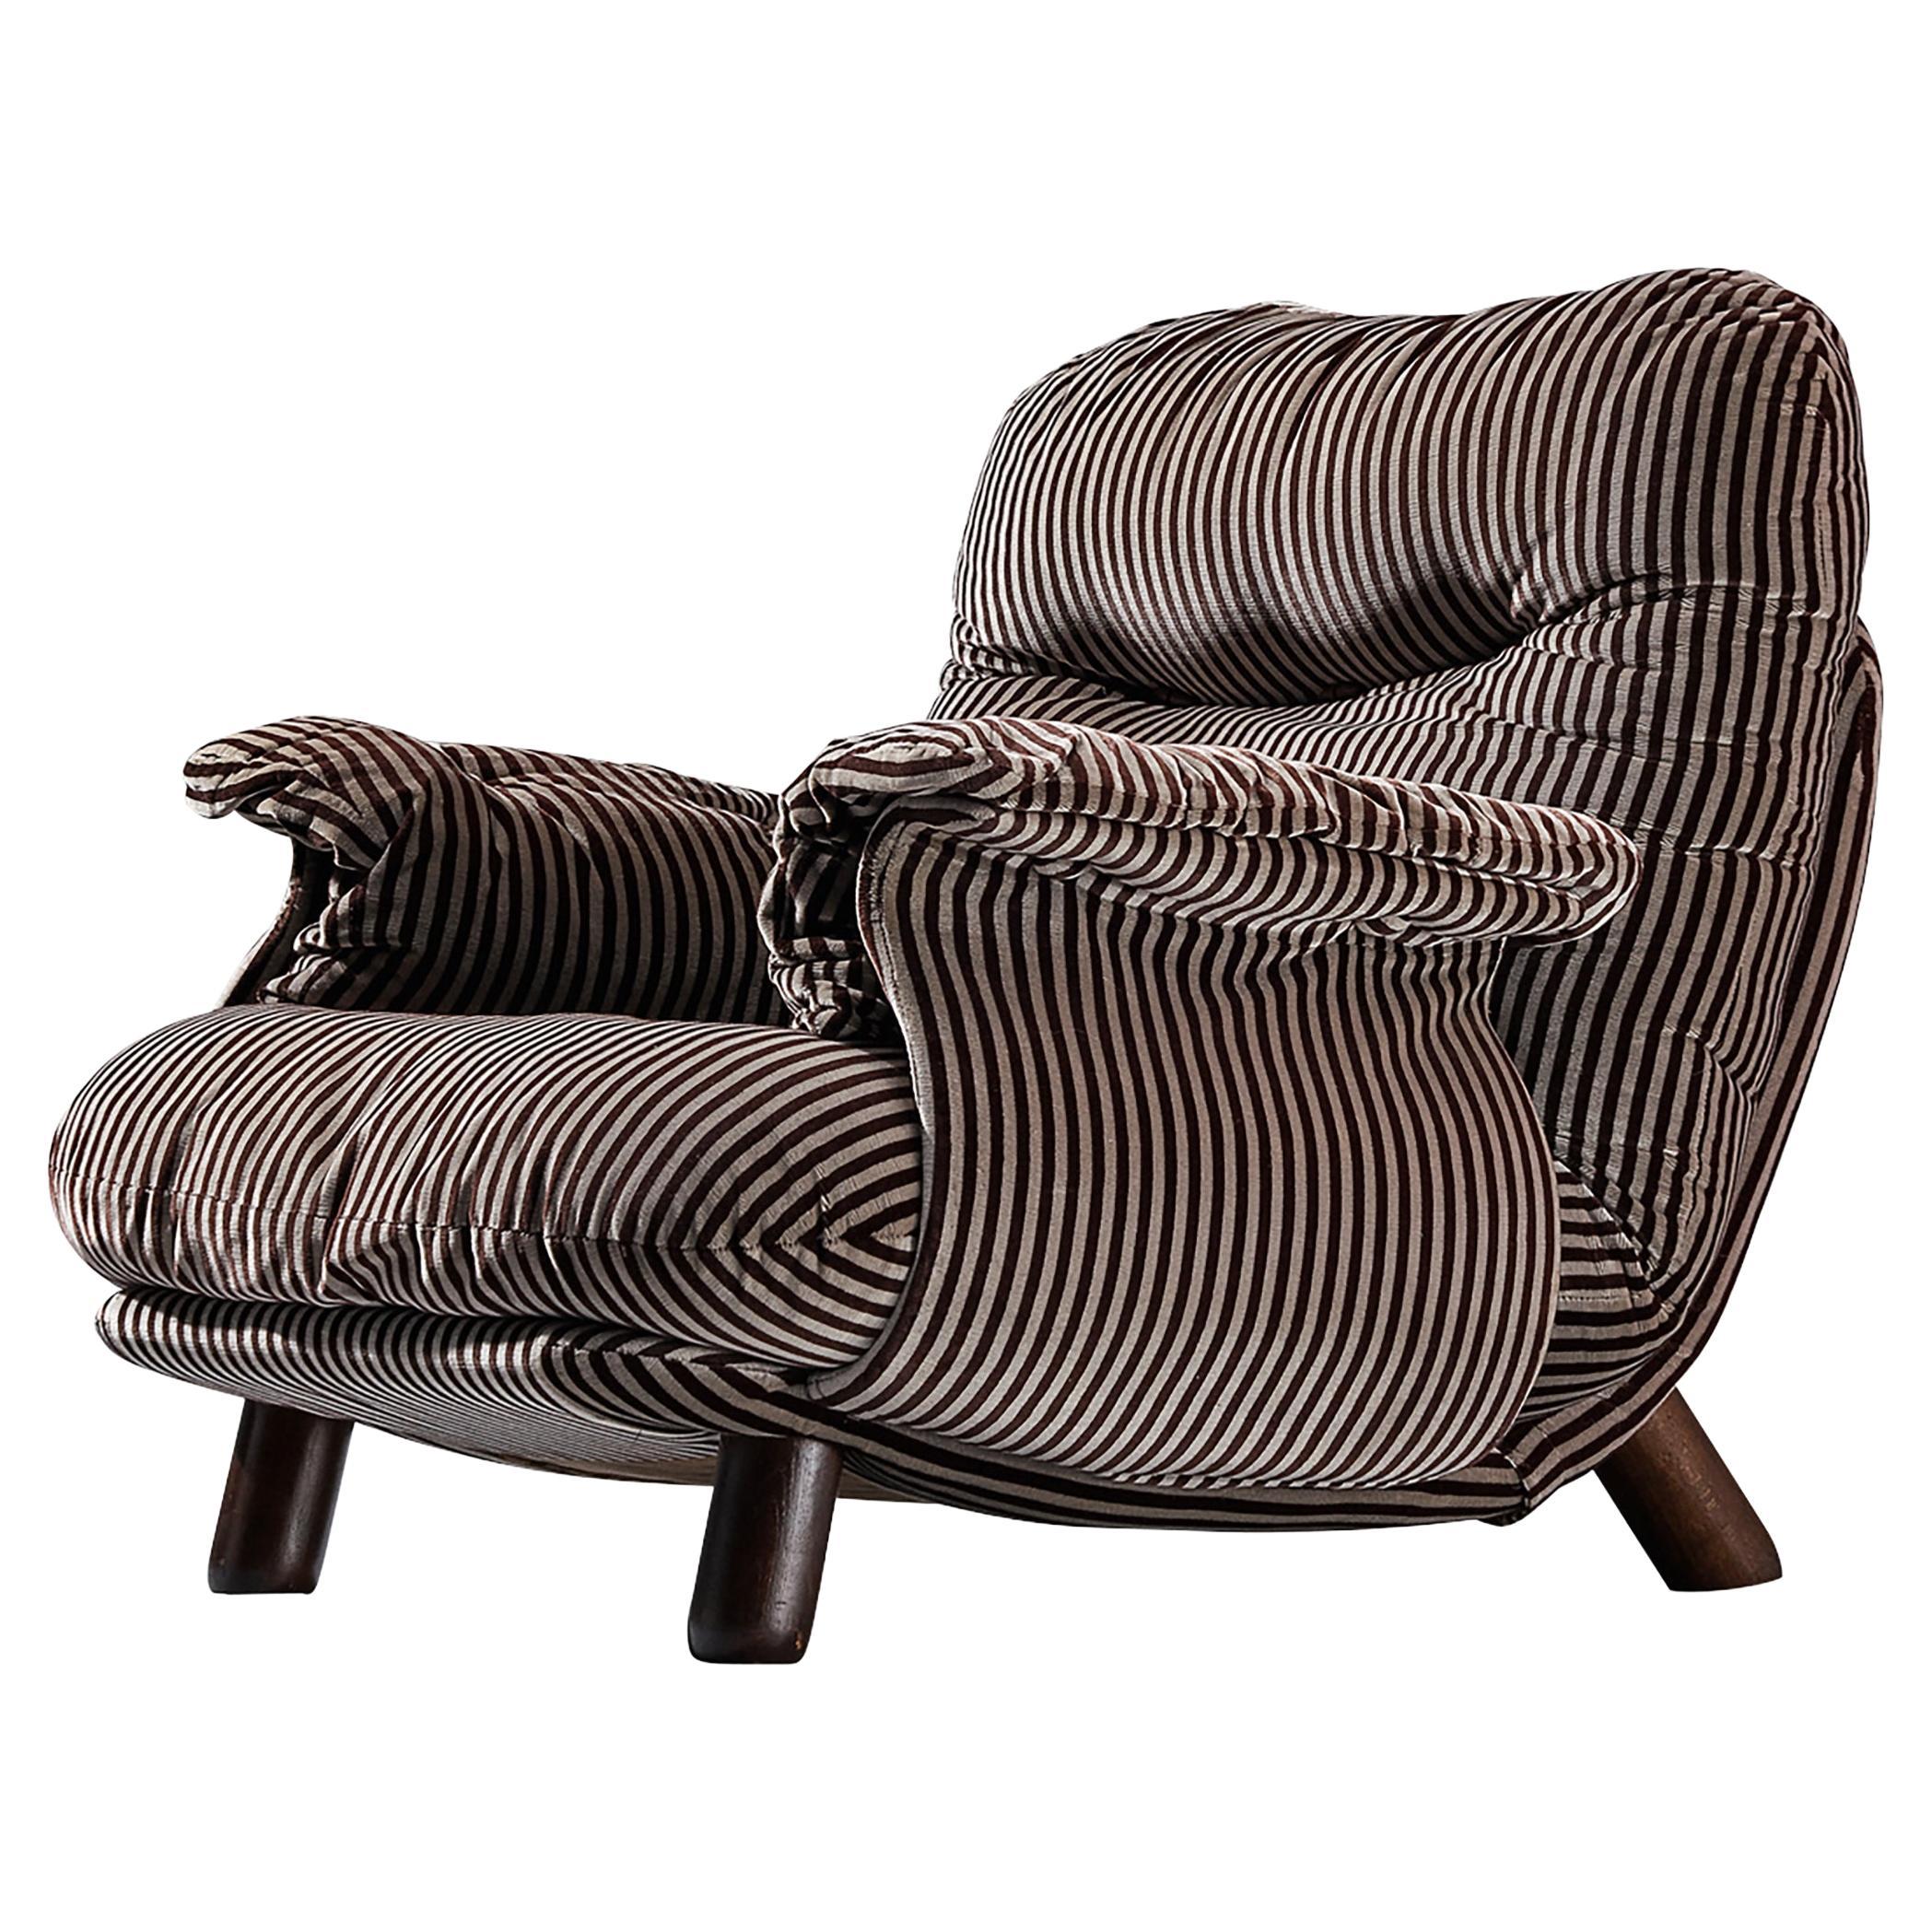 E. Cobianchi for Insa Lounge Chair in Striped Upholstery For Sale